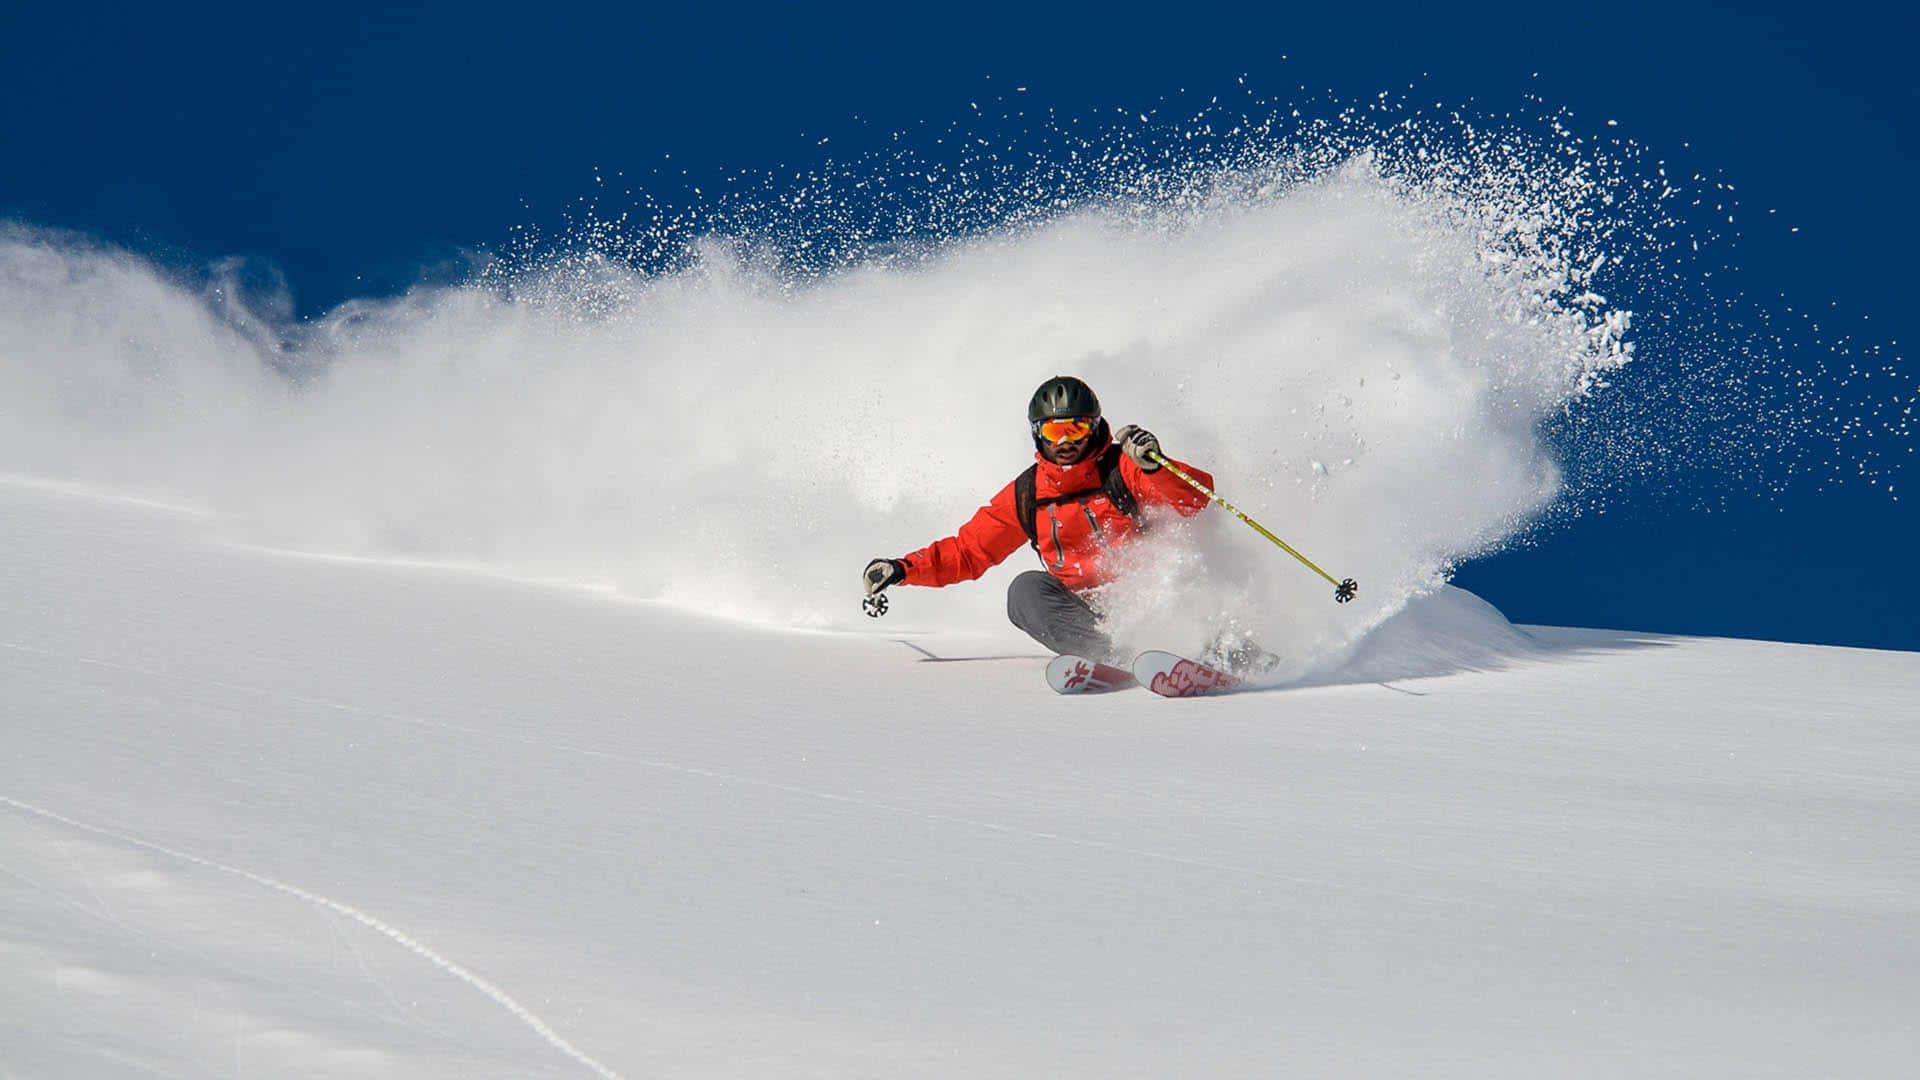 A skier carving down a pristine snowy slope